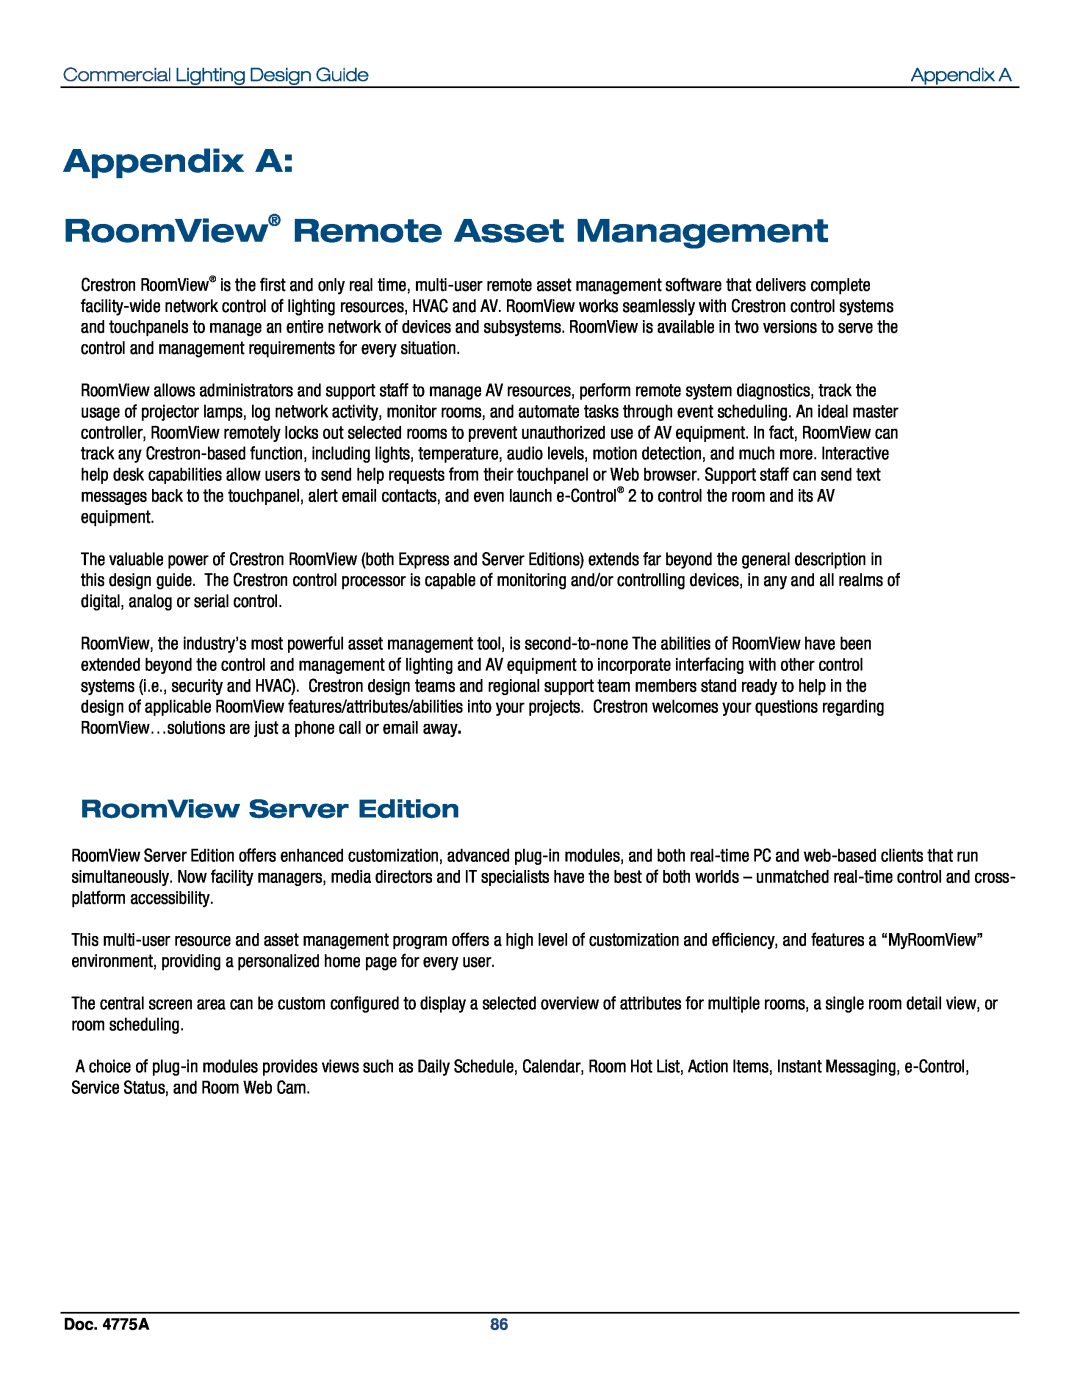 Crestron electronic IPAC-GL1, GLPS-SW-FT, GLPS-HSW Appendix A RoomView Remote Asset Management, RoomView Server Edition 